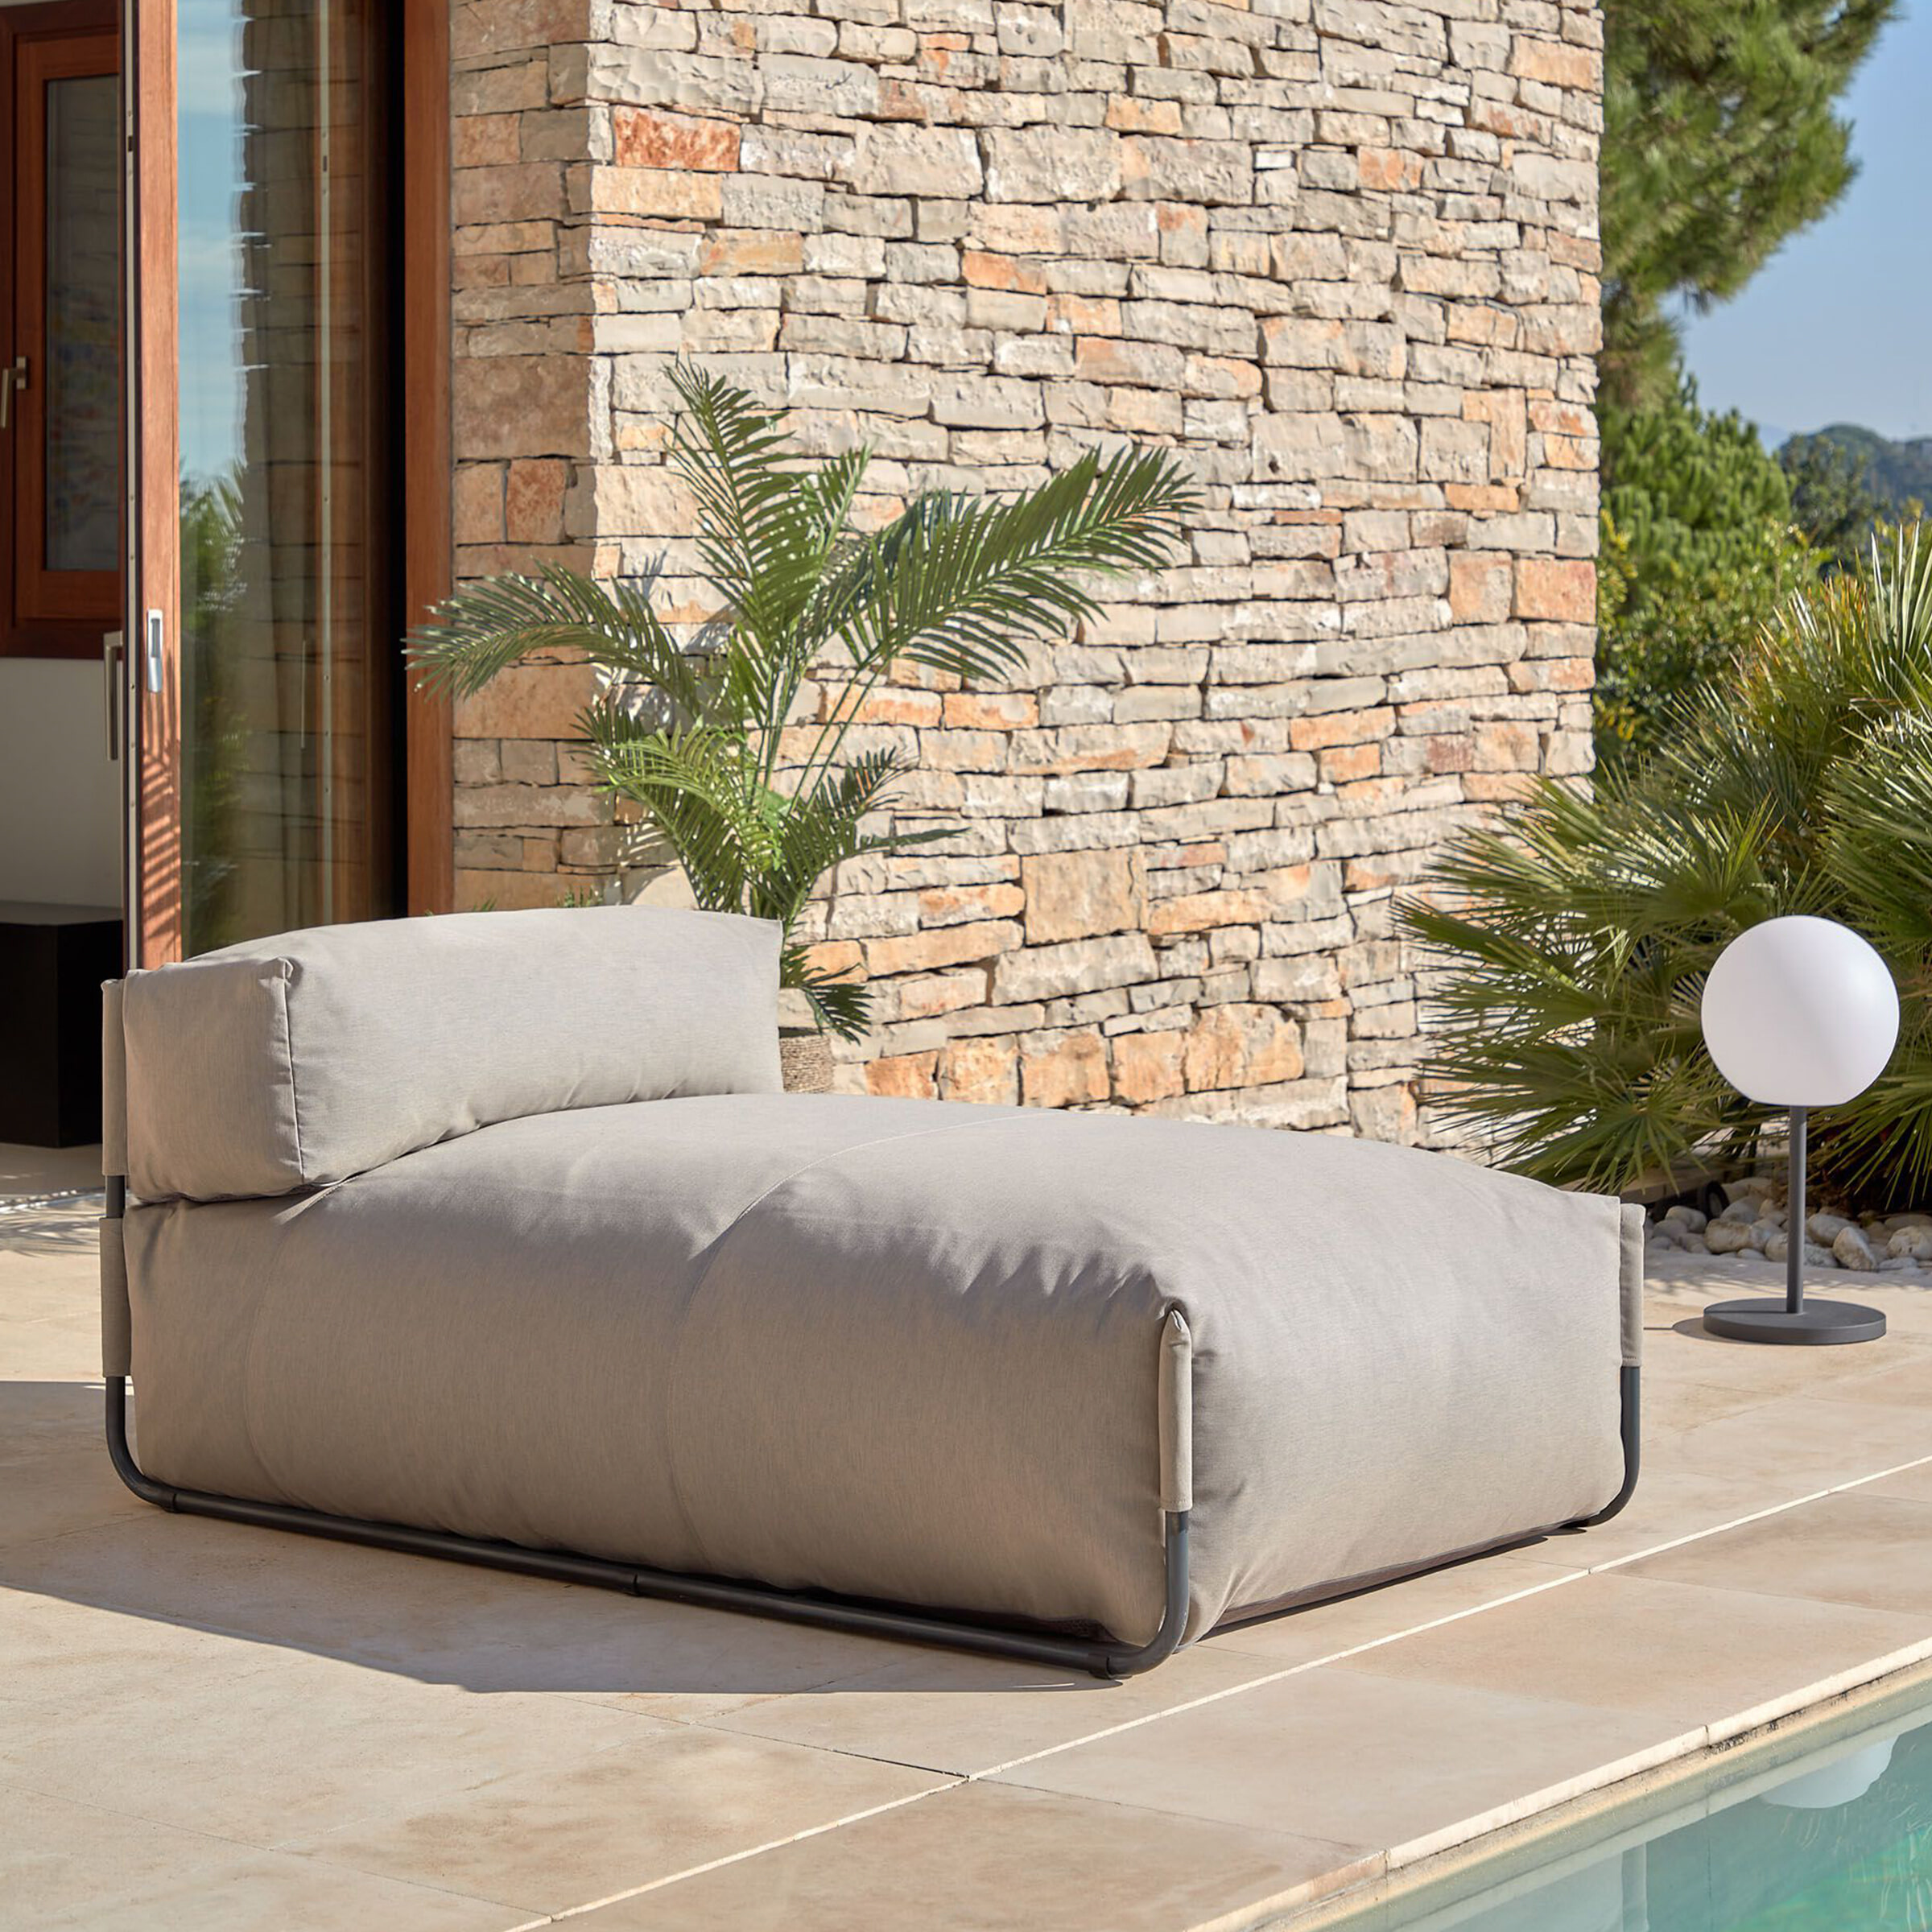 Kave Home Modulaire Outdoor Bank Square Chaise Longue